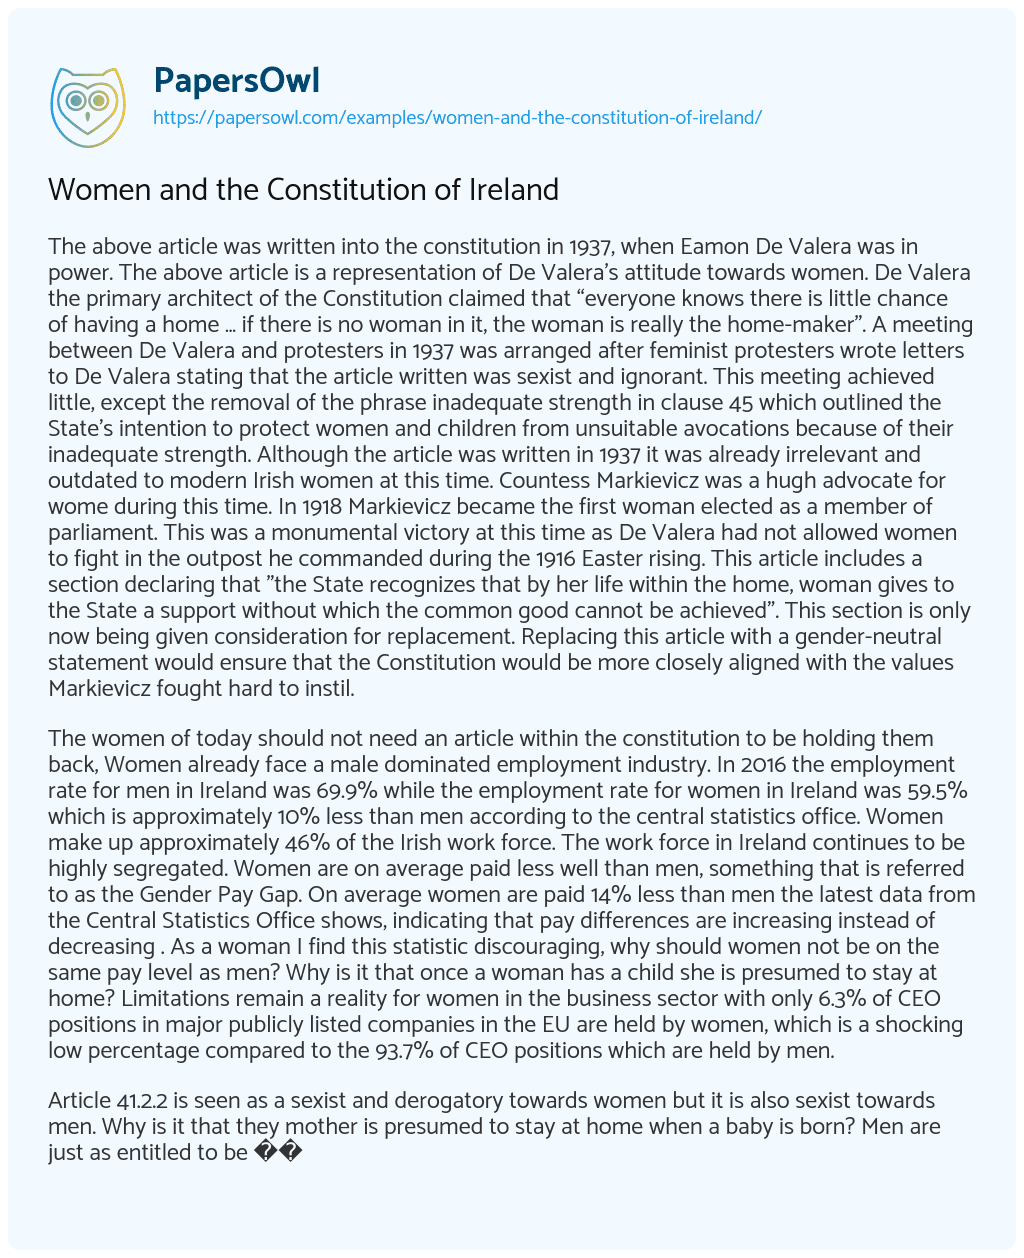 Essay on Women and the Constitution of Ireland